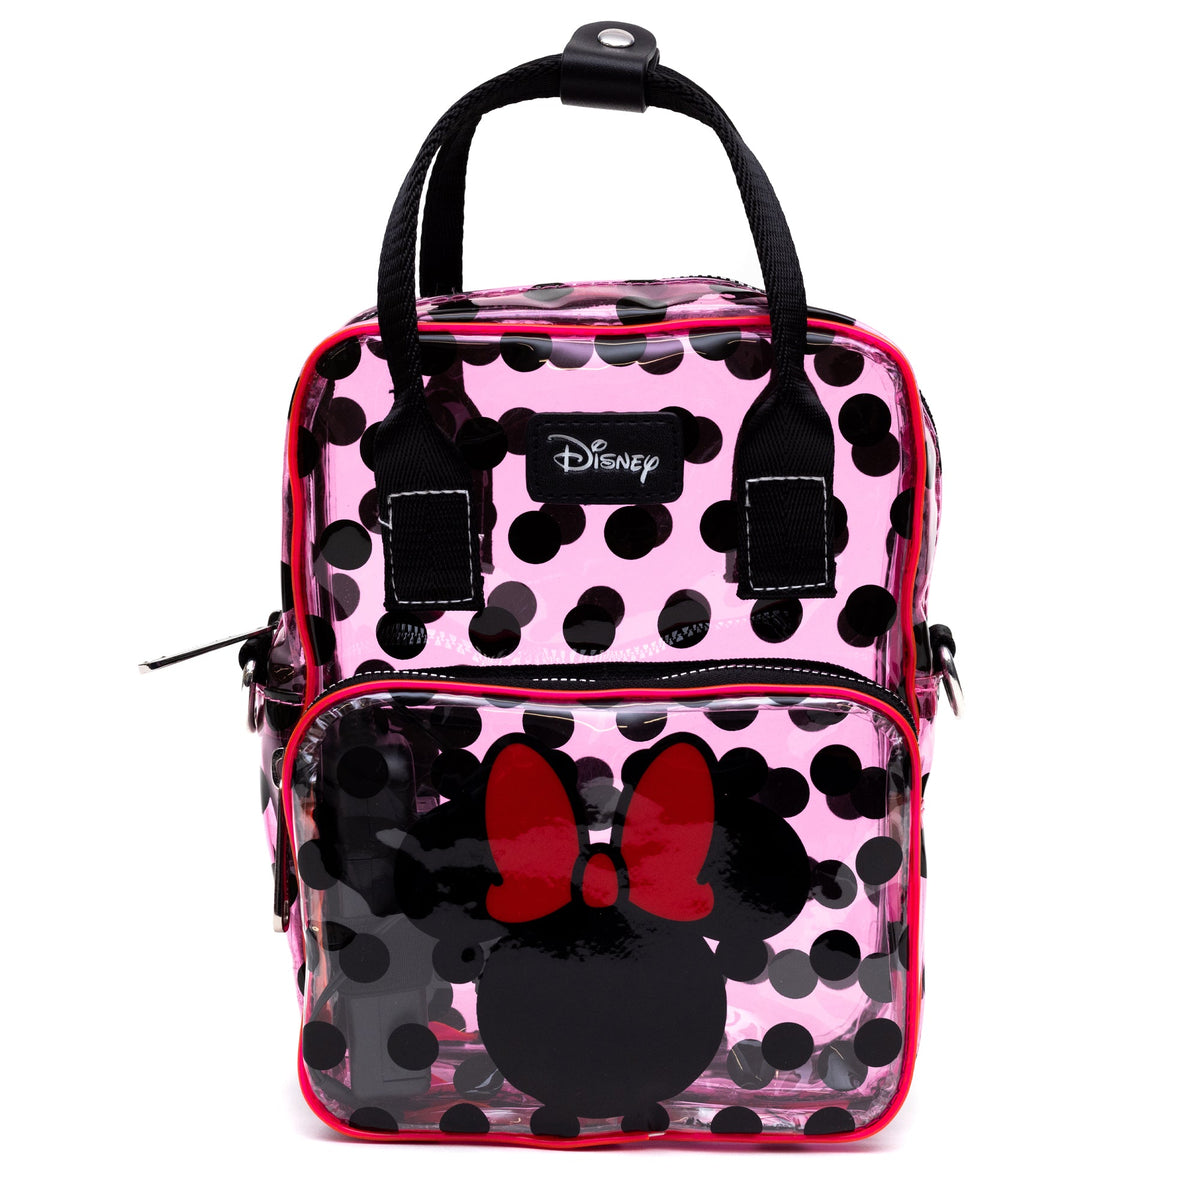 Disney Bag, Cross Body Light Up, Minnie Mouse Ears and Bow Icon with Polka Dots, Transparent, Pink PVC